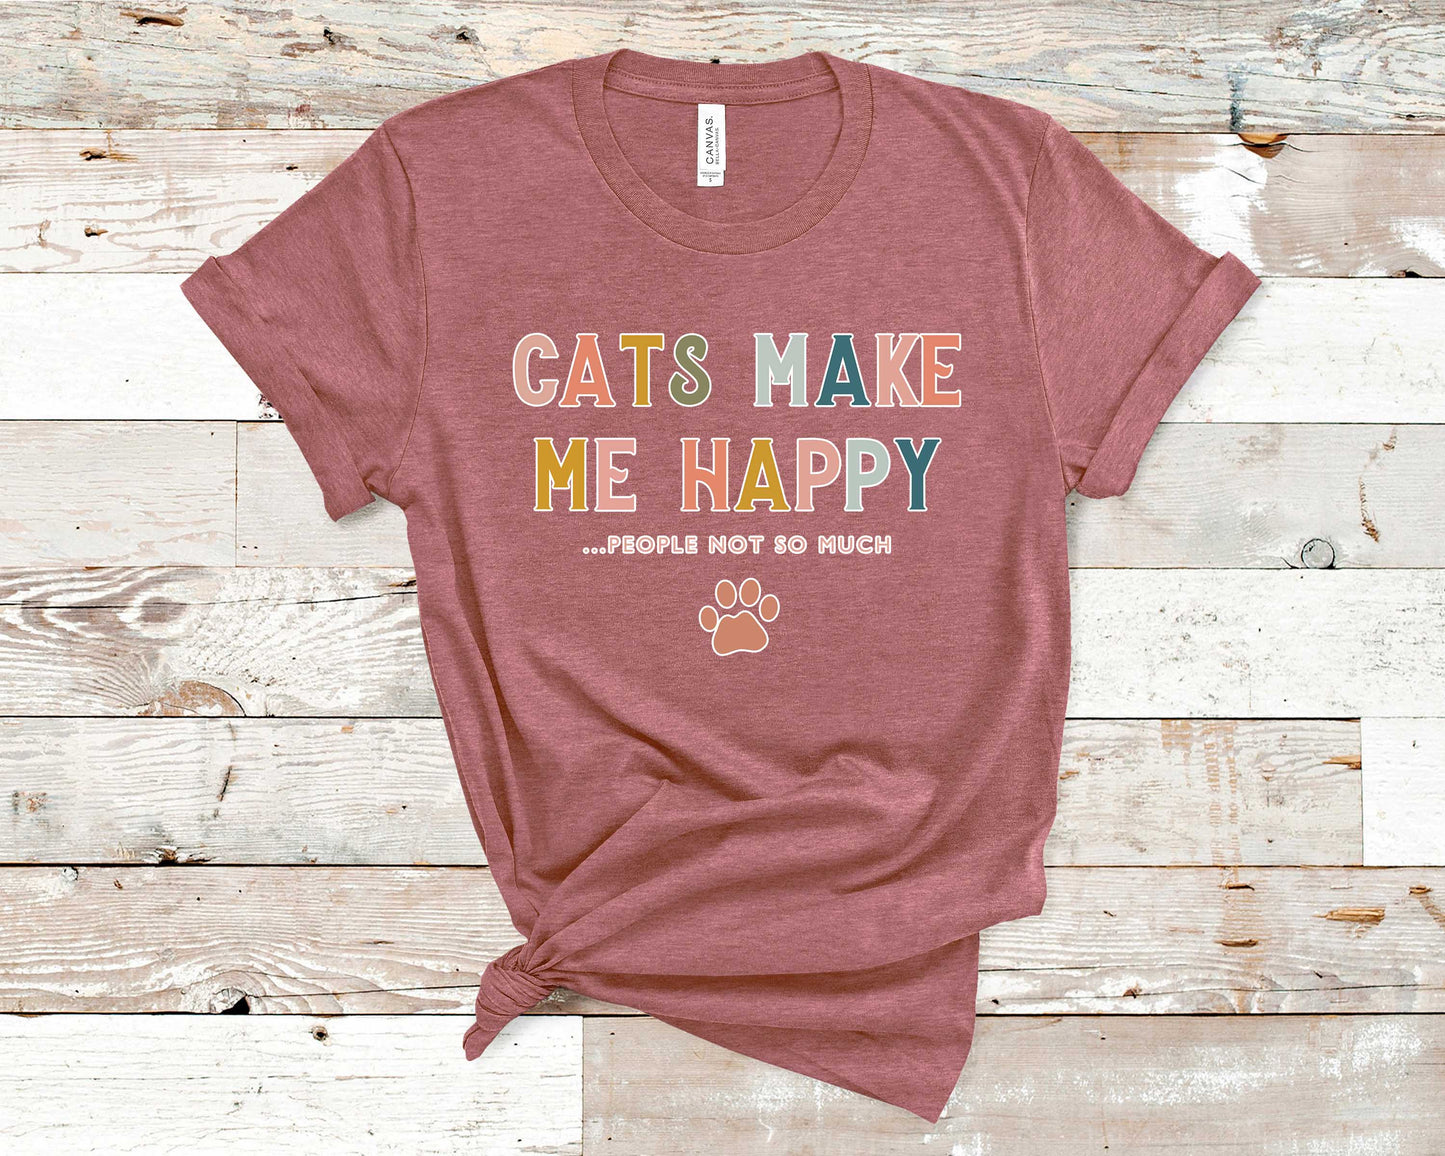 Cats Make Me Happy People Not So Much Shirt | Pet Lovers Tees, Cat Lovers Shirts, Tshirt Gift for Pet Owners, Funny Cat T-Shirt